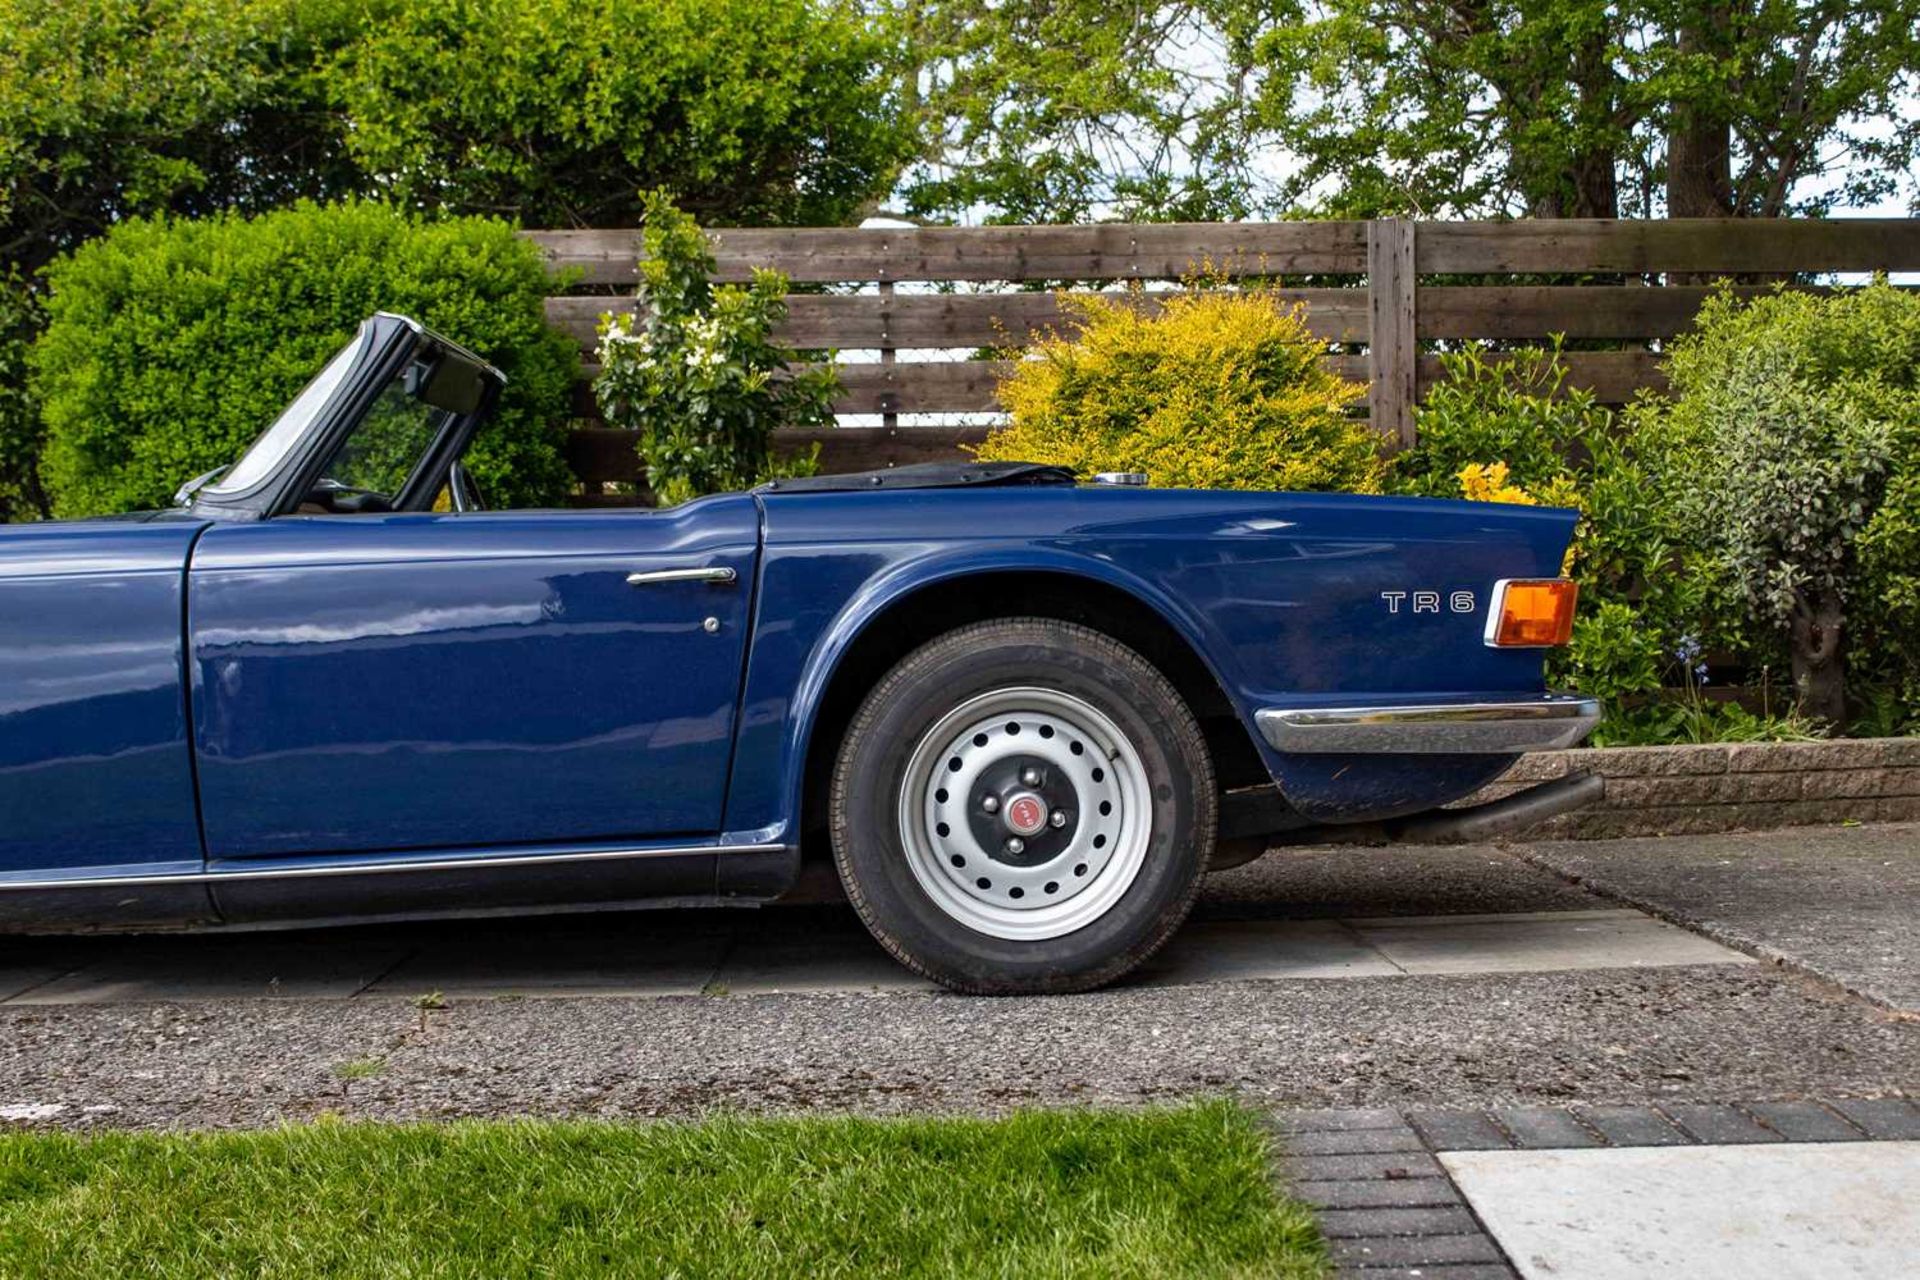 1972 Triumph TR6 Home market example, specified with manual overdrive transmission - Image 50 of 95